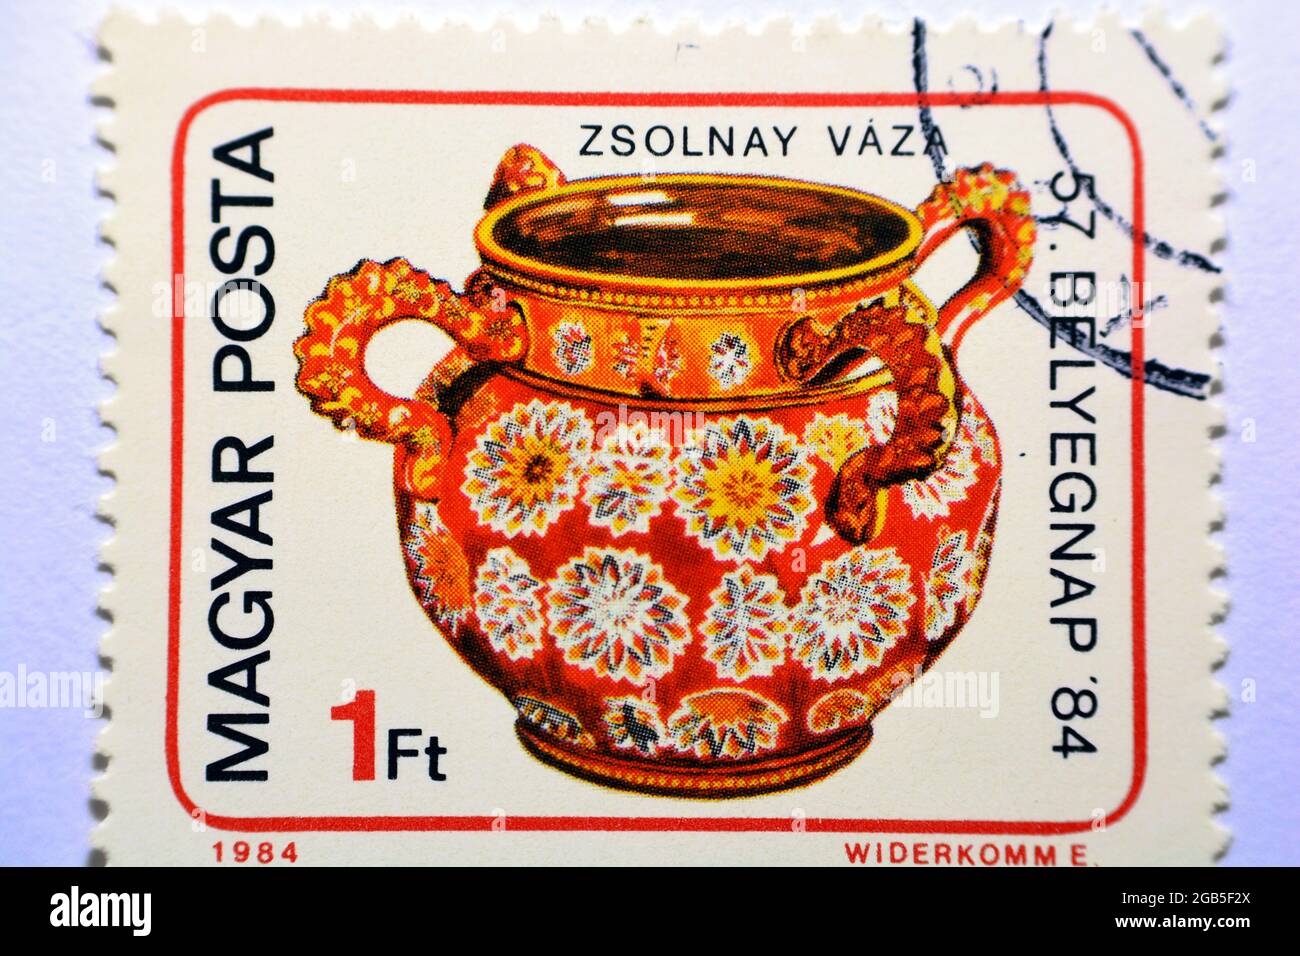 A postage stamp printed in the Hungary shows Four-handled vase, Zsolnay, circa 1984, Old Stamp shows a Vase from Zsolnay porcelain factory , red 1984, Stock Photo